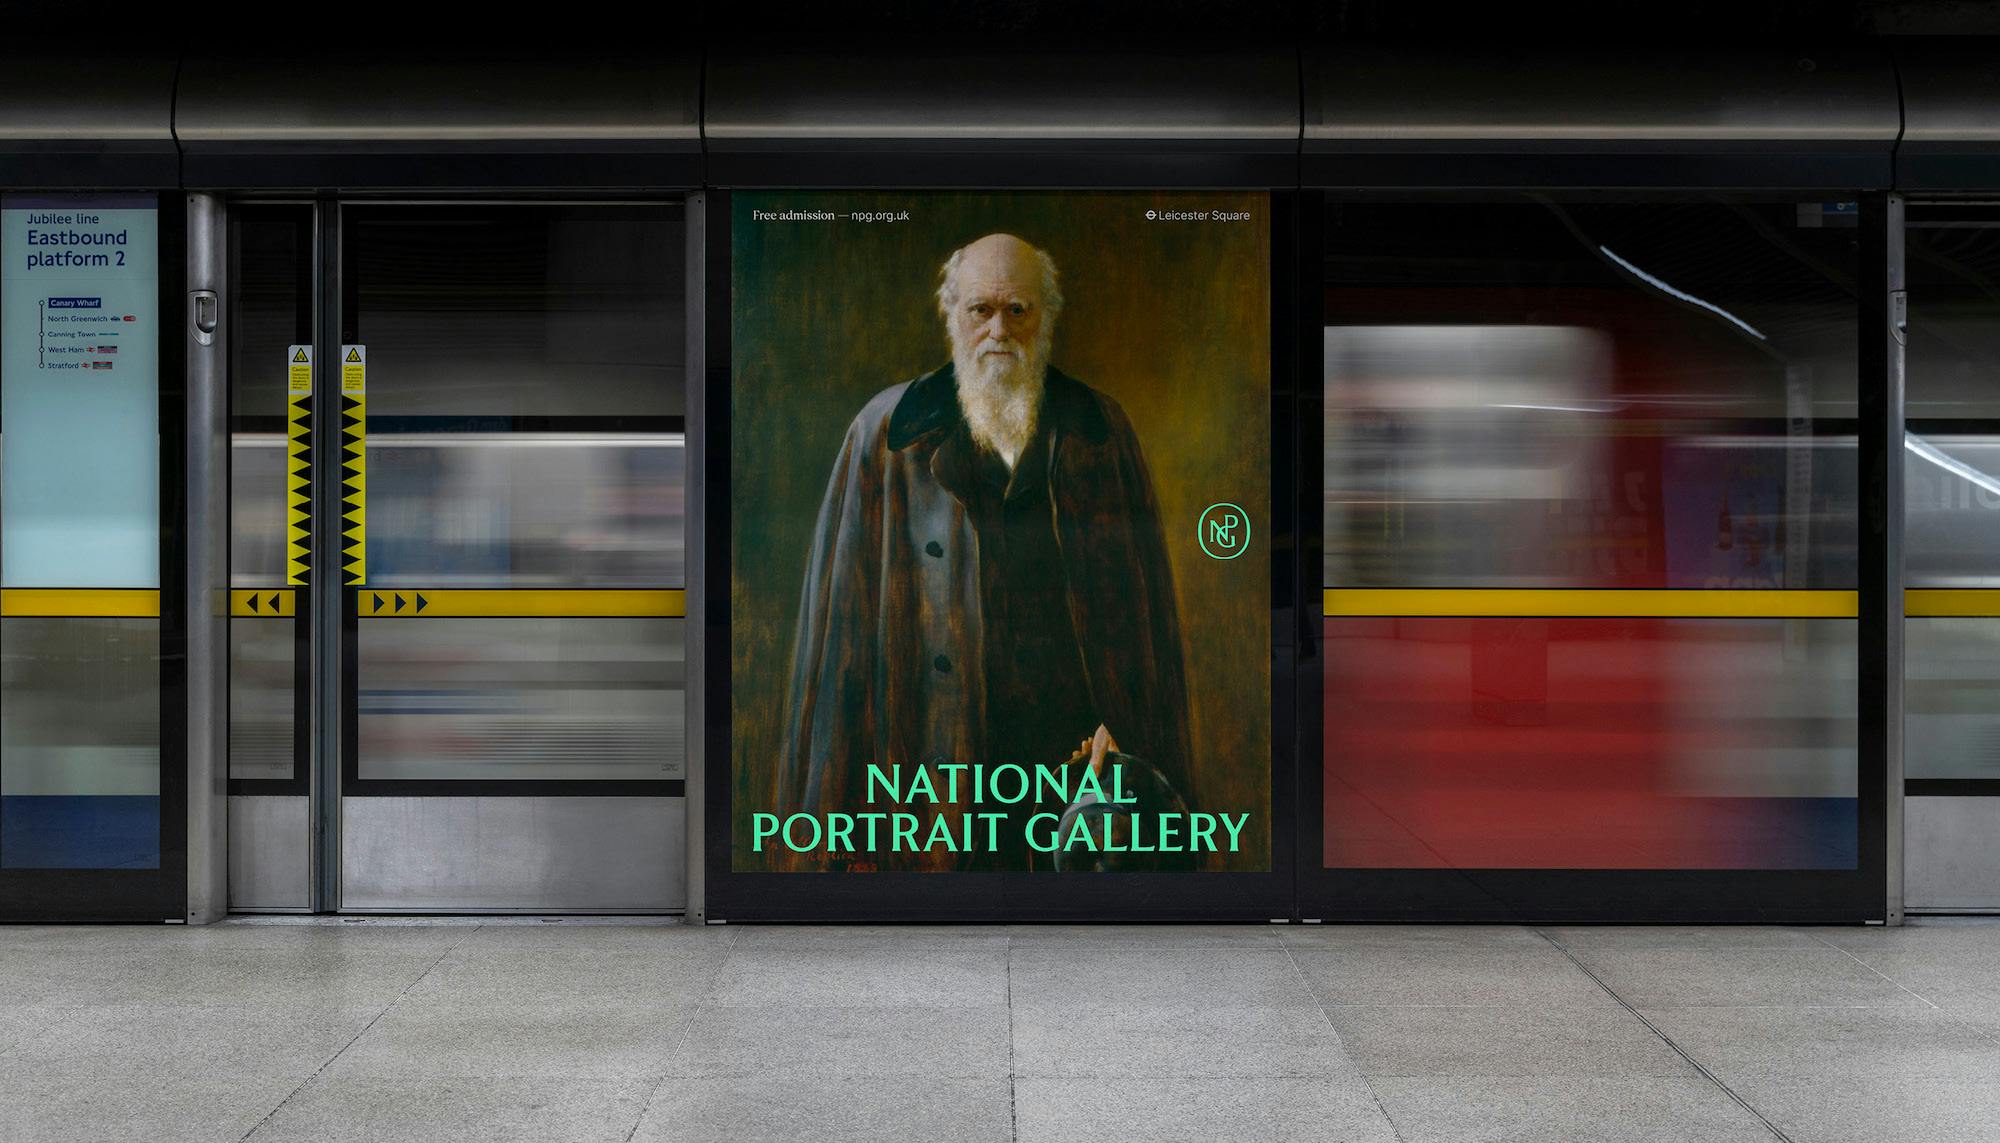 The National Portrait Gallery in London gets a brand facelift